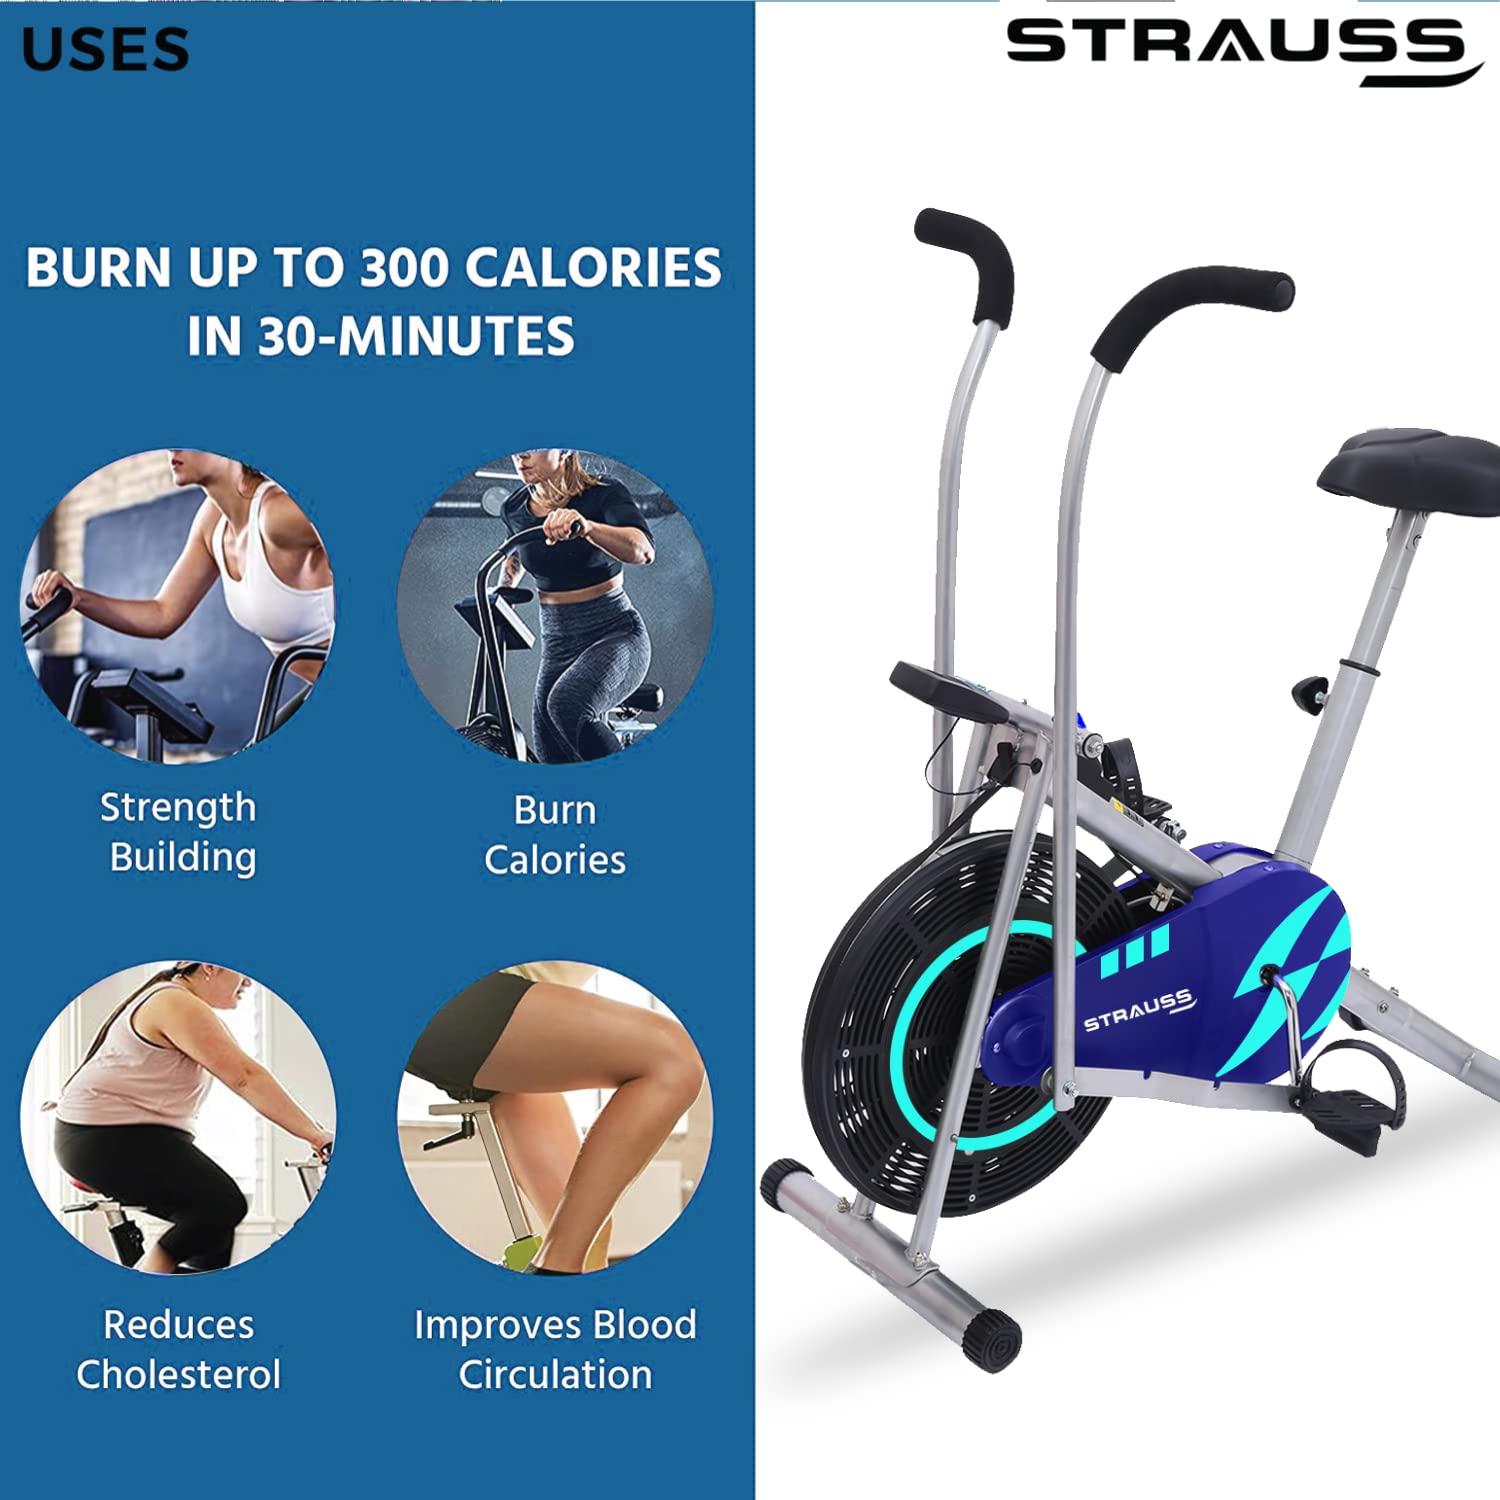 Strauss Stayfit Exercise Bike With Moving or Stationary Handle | Adjustable Resistance With Cushioned Seat and LCD Monitor | Fitness Cycle For Home Gym (Max Weight: 120Kg), Blue